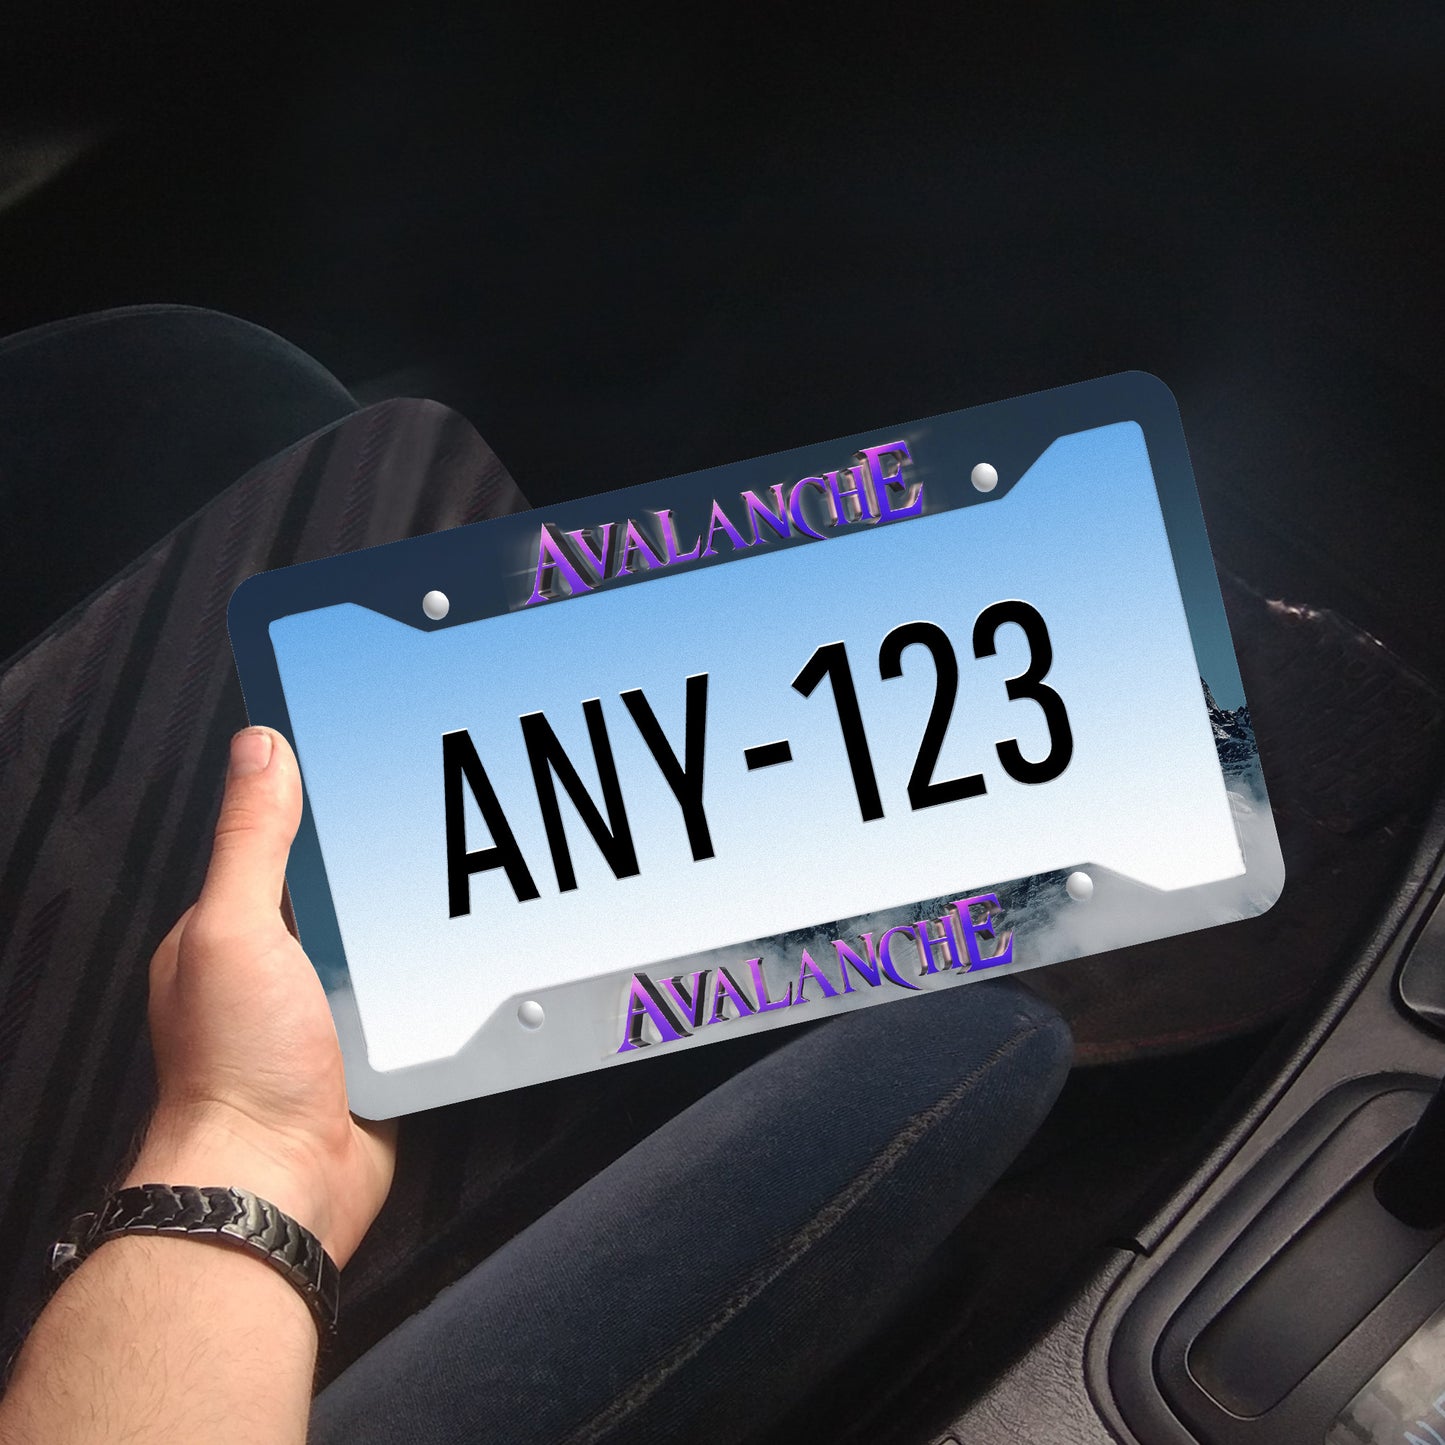 Avalanche Customized License Plate Frames